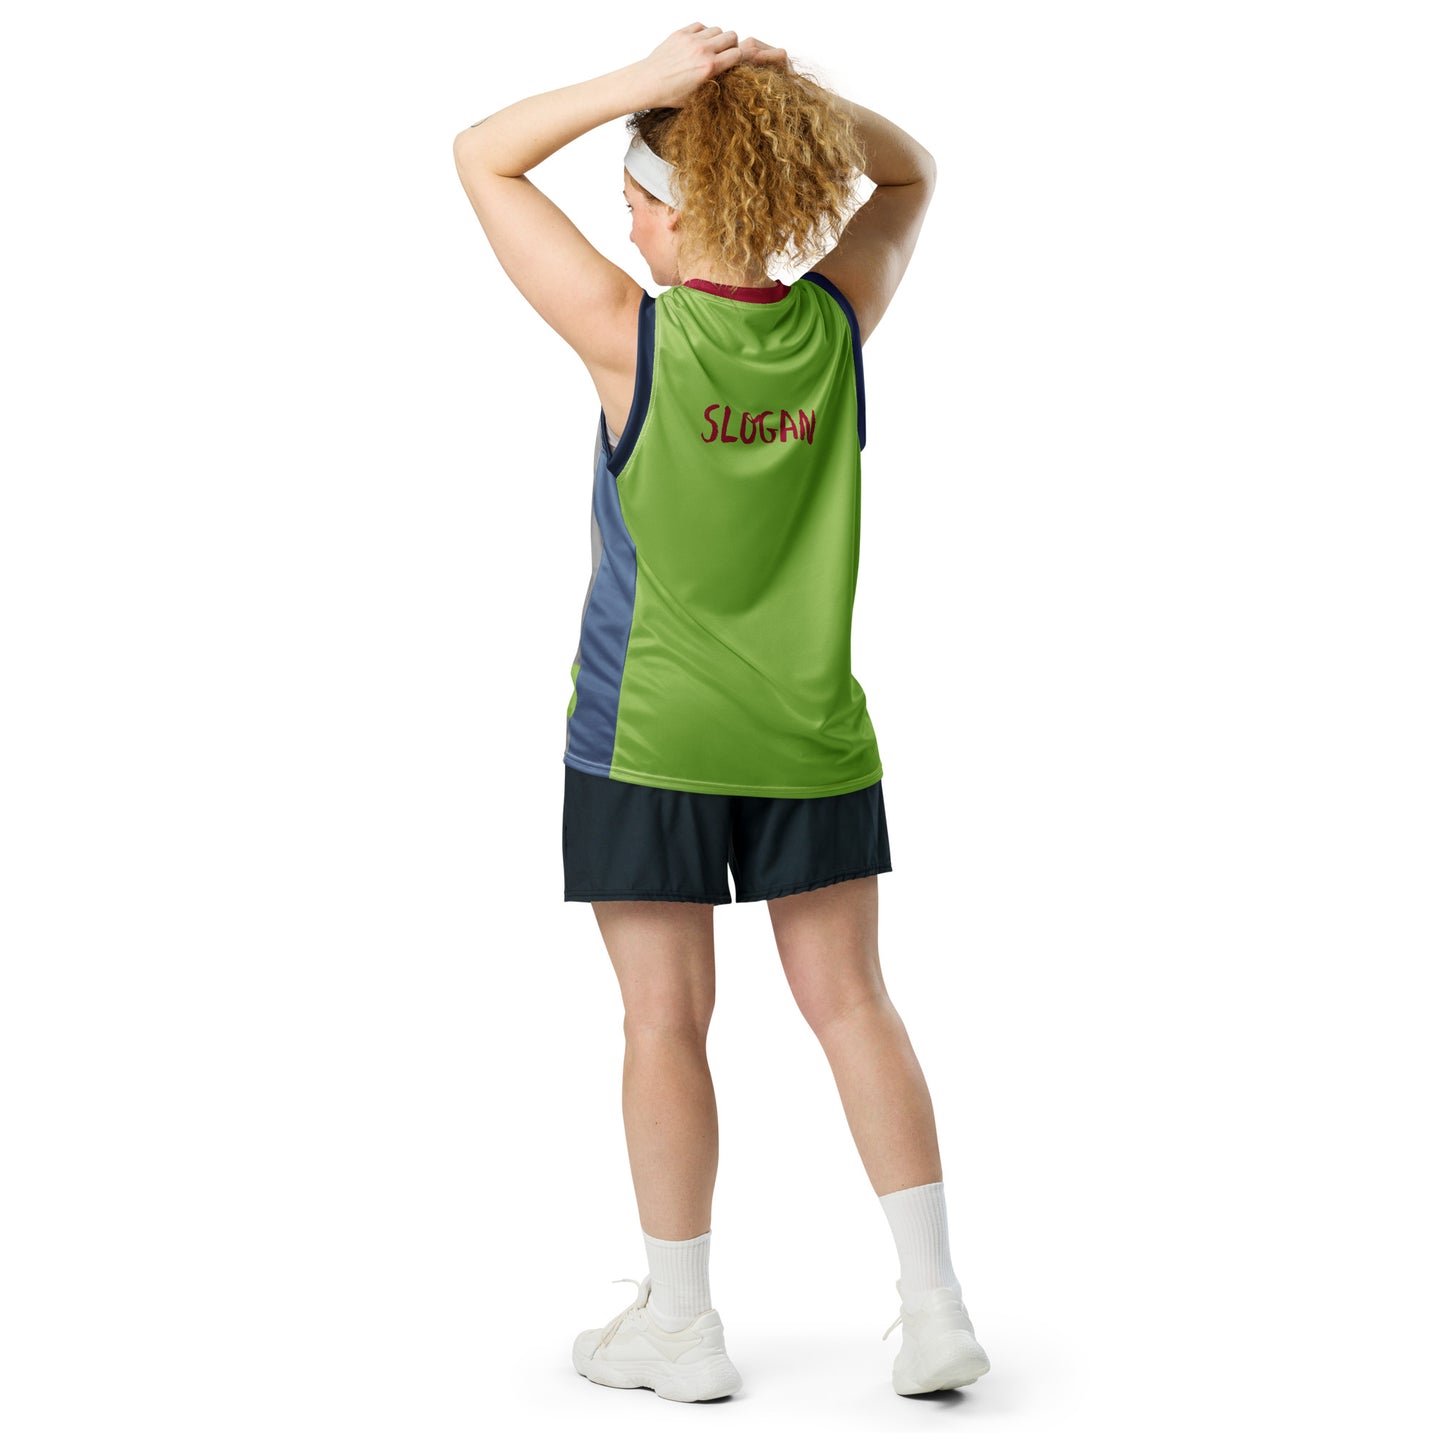 TIME OF VIBES - Recycled unisex basketball jersey CORPORATE - €42.00